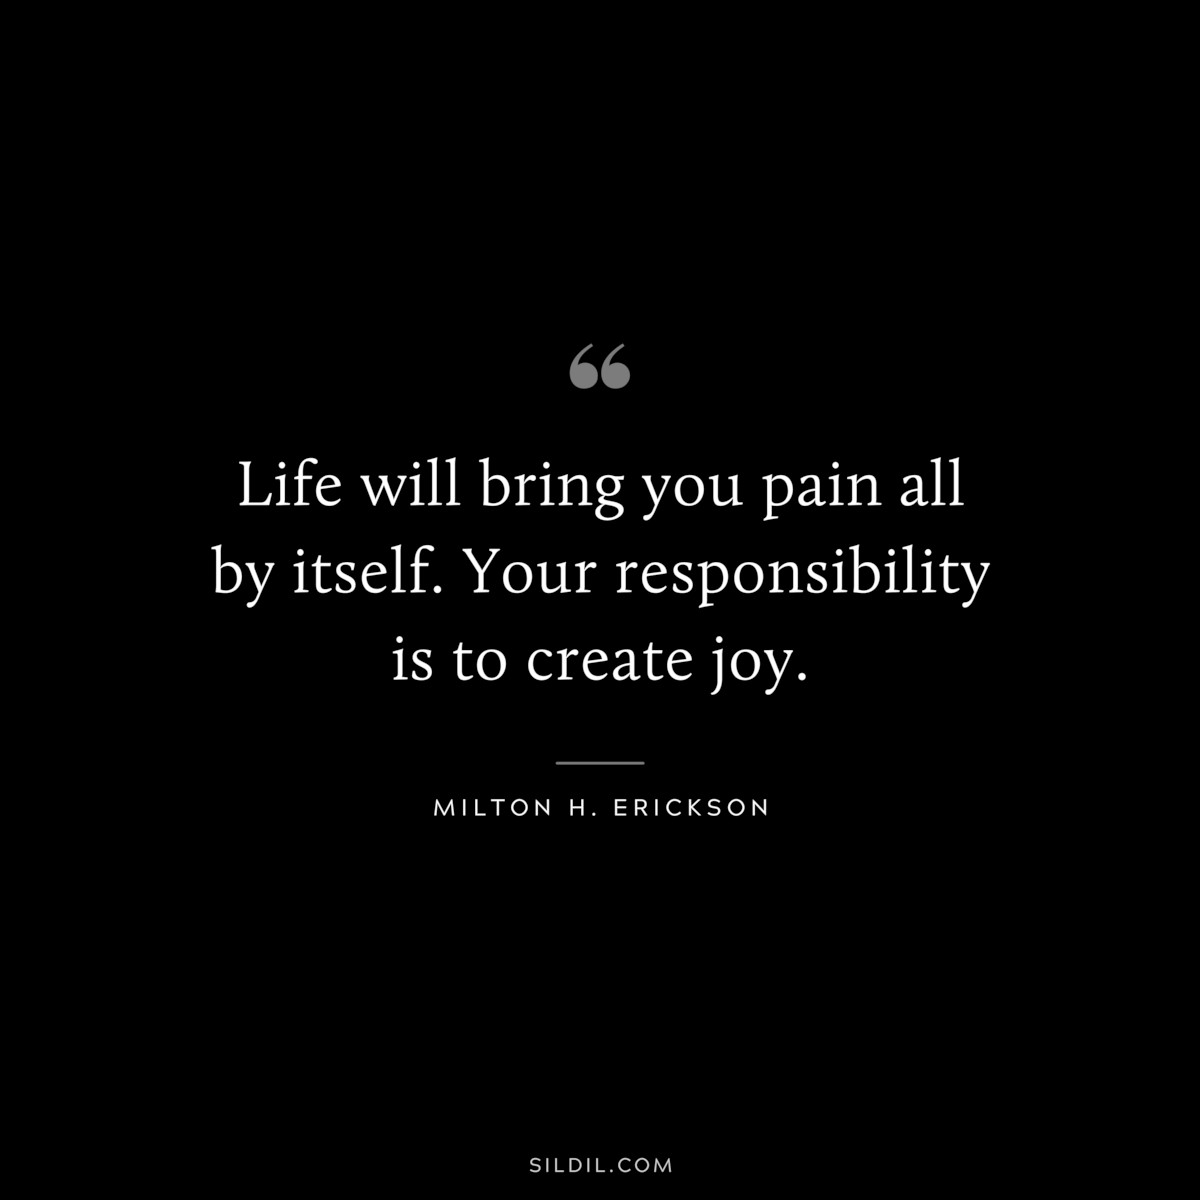 Life will bring you pain all by itself. Your responsibility is to create joy. ― Milton H. Erickson